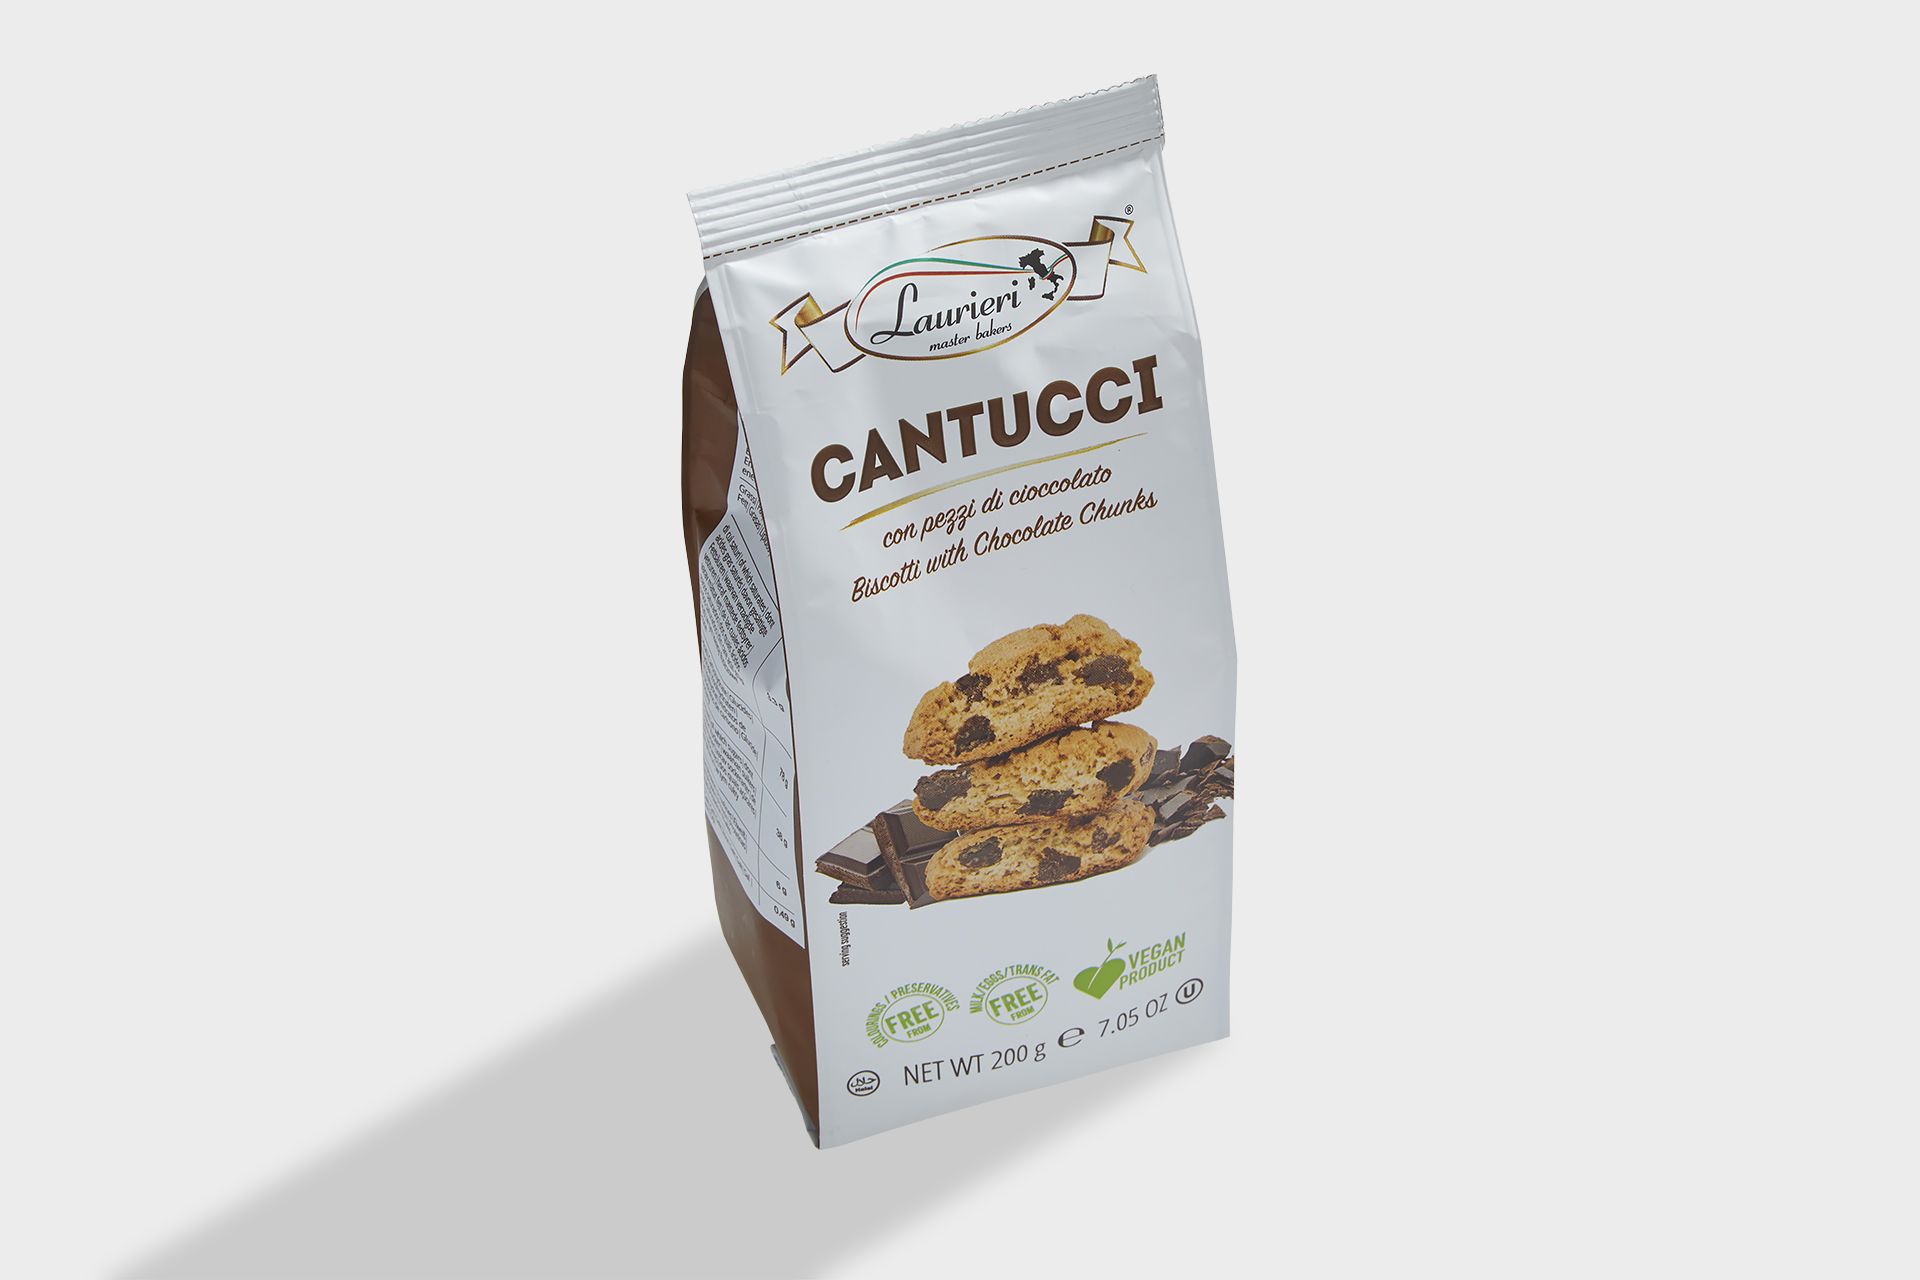 Cantucci chocolate Cantuccini og cookies Lowin